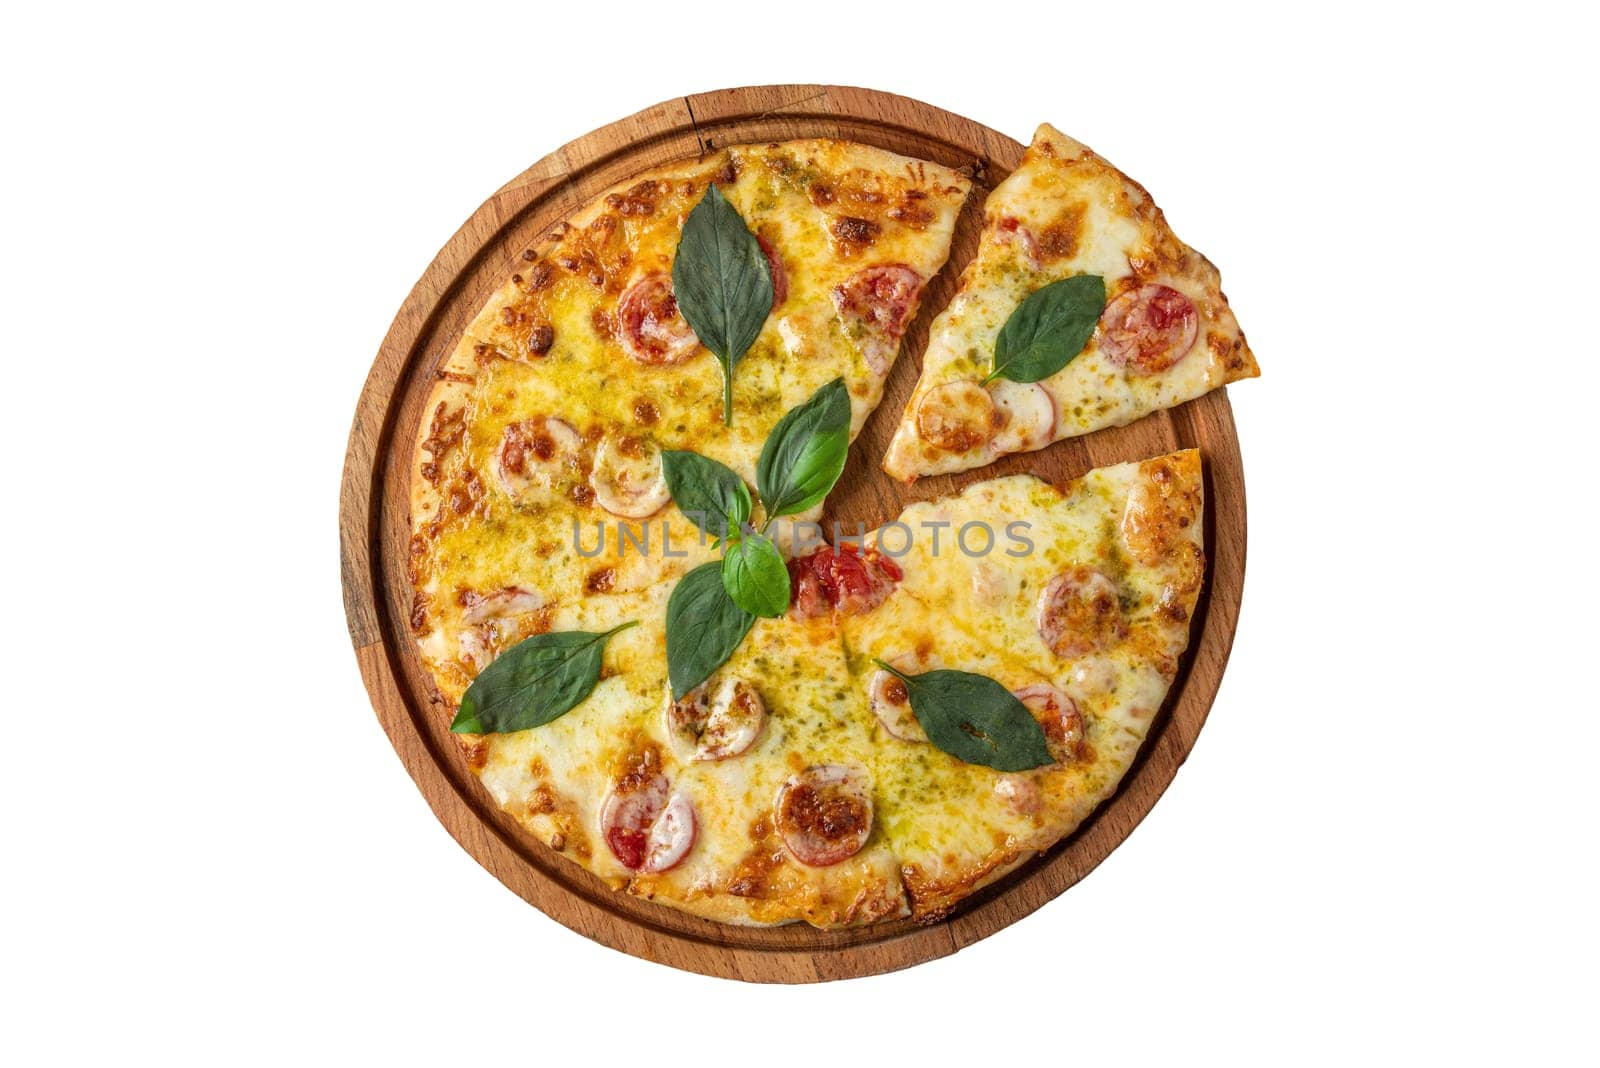 rustic italian pizza with mozzarella, cheese and basil leaves. top view  by Sonat